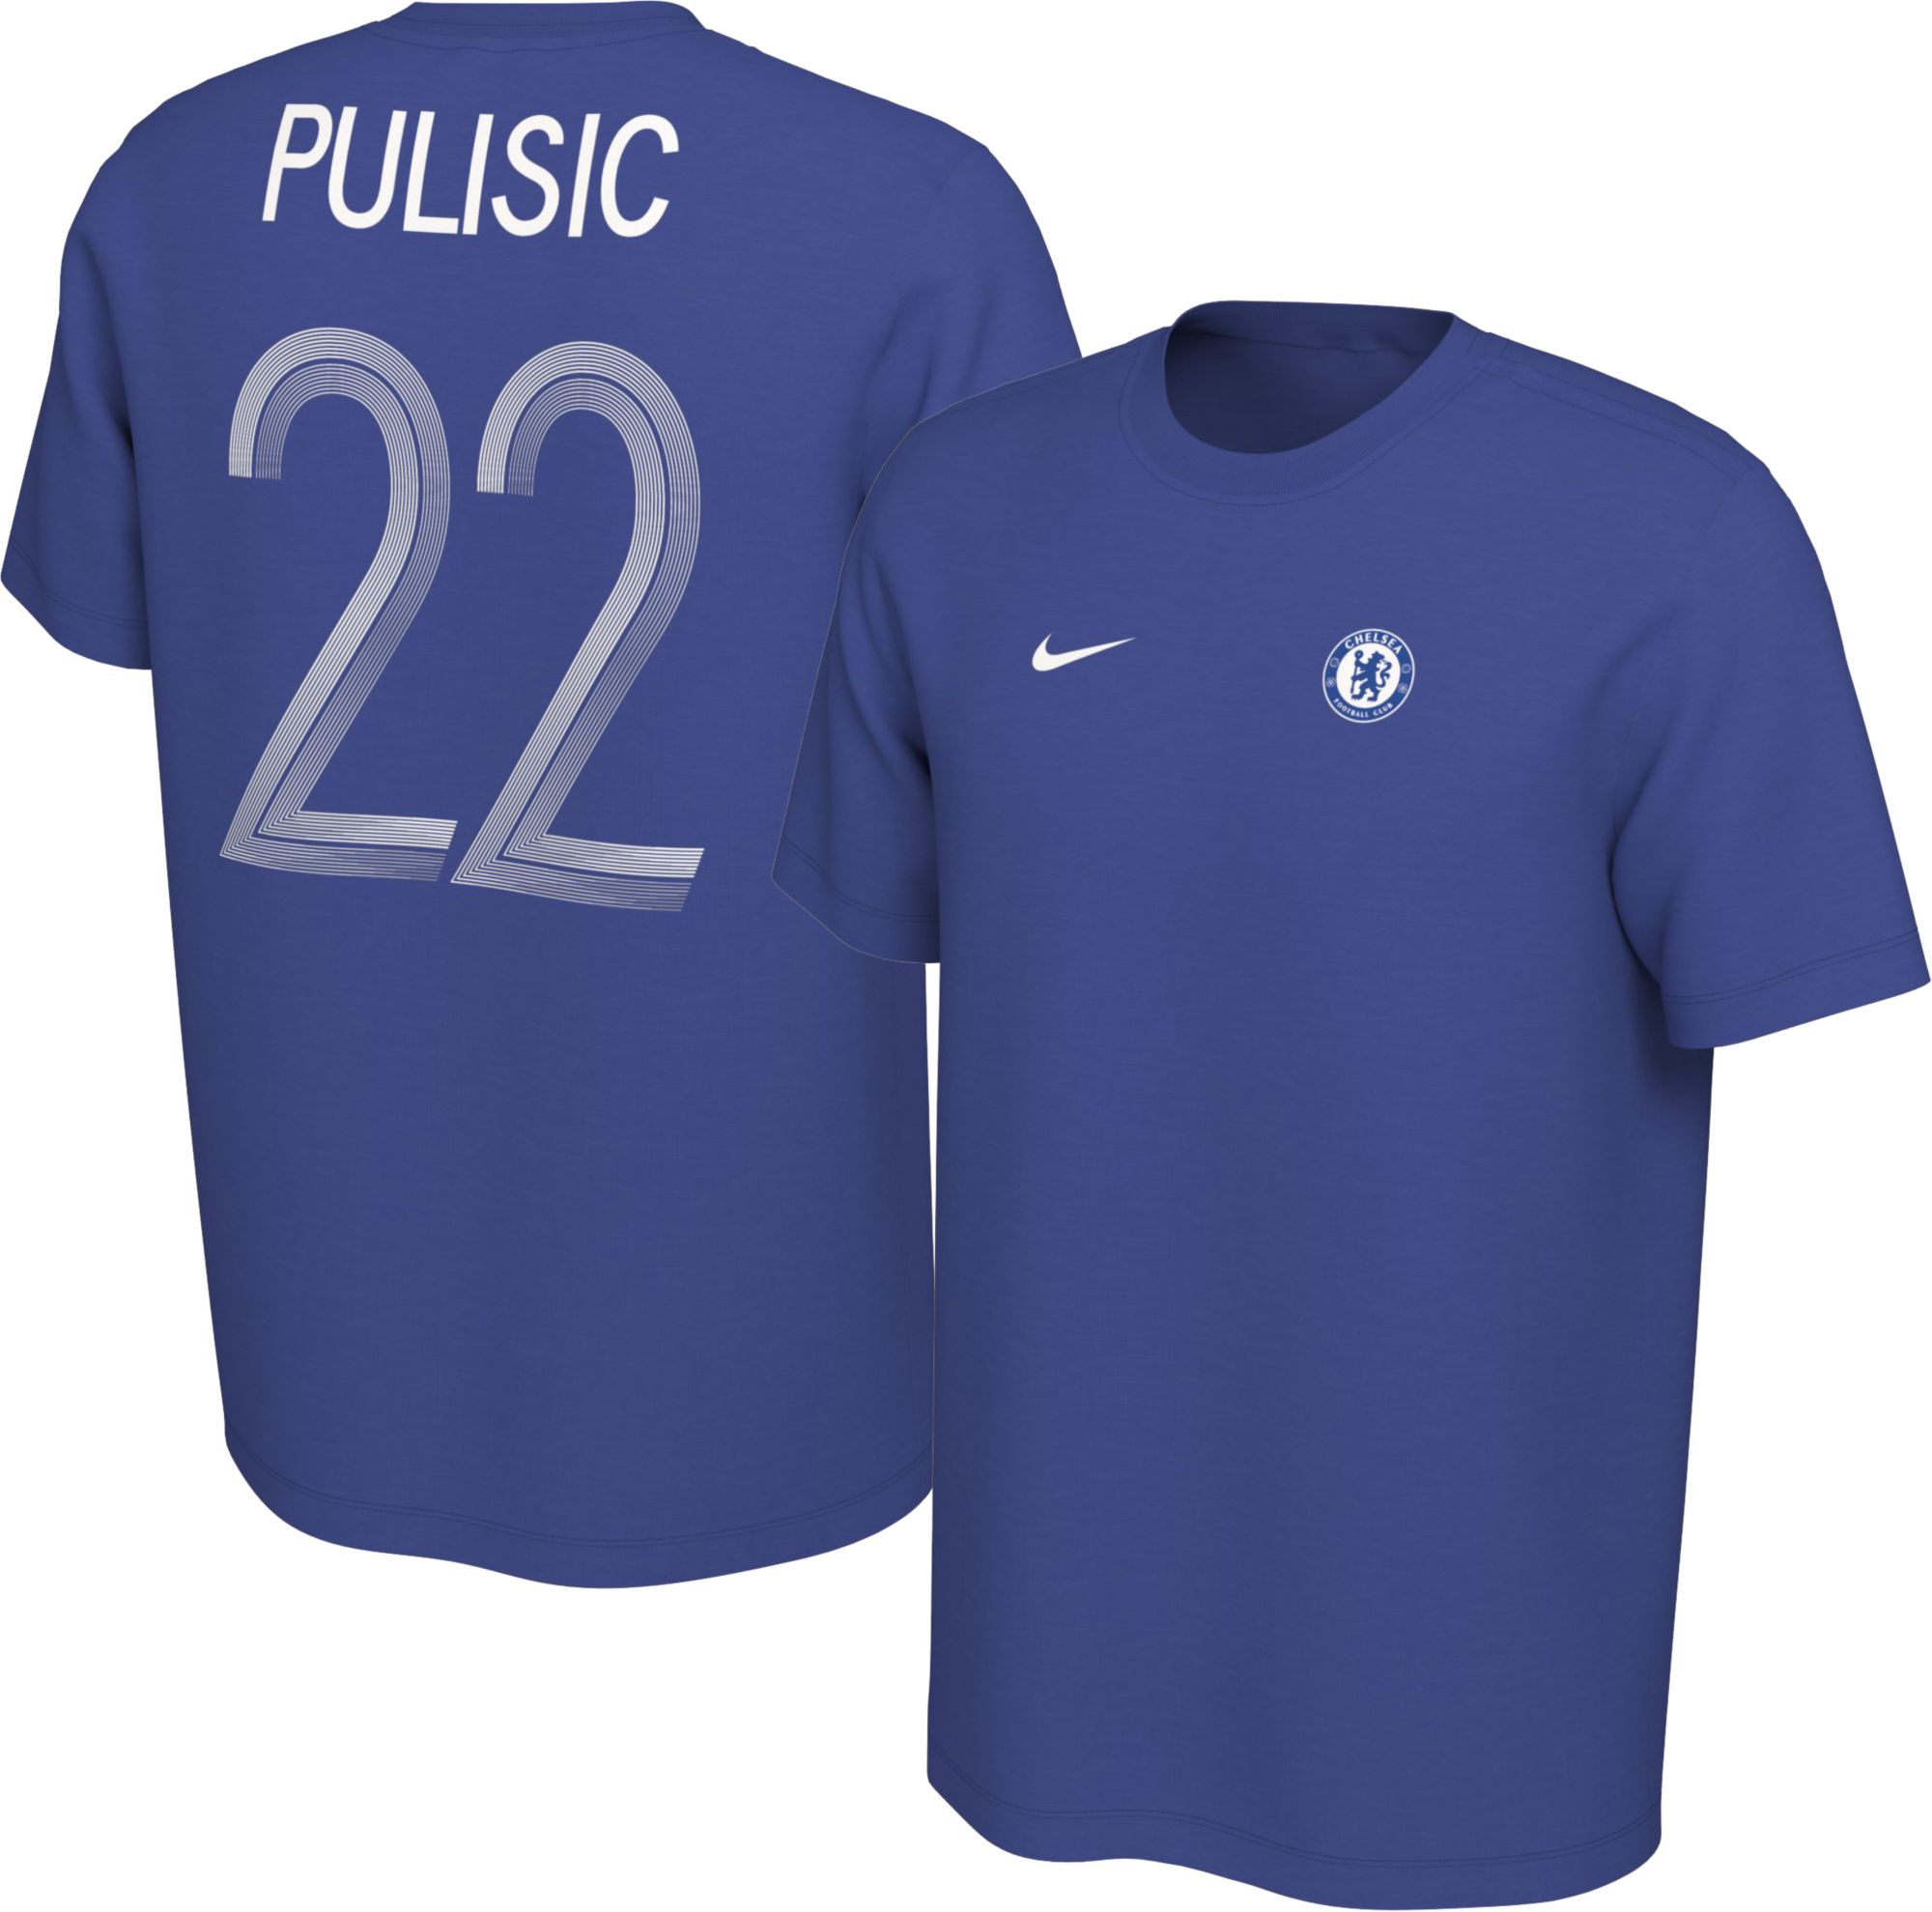 chelsea pulisic jersey youth